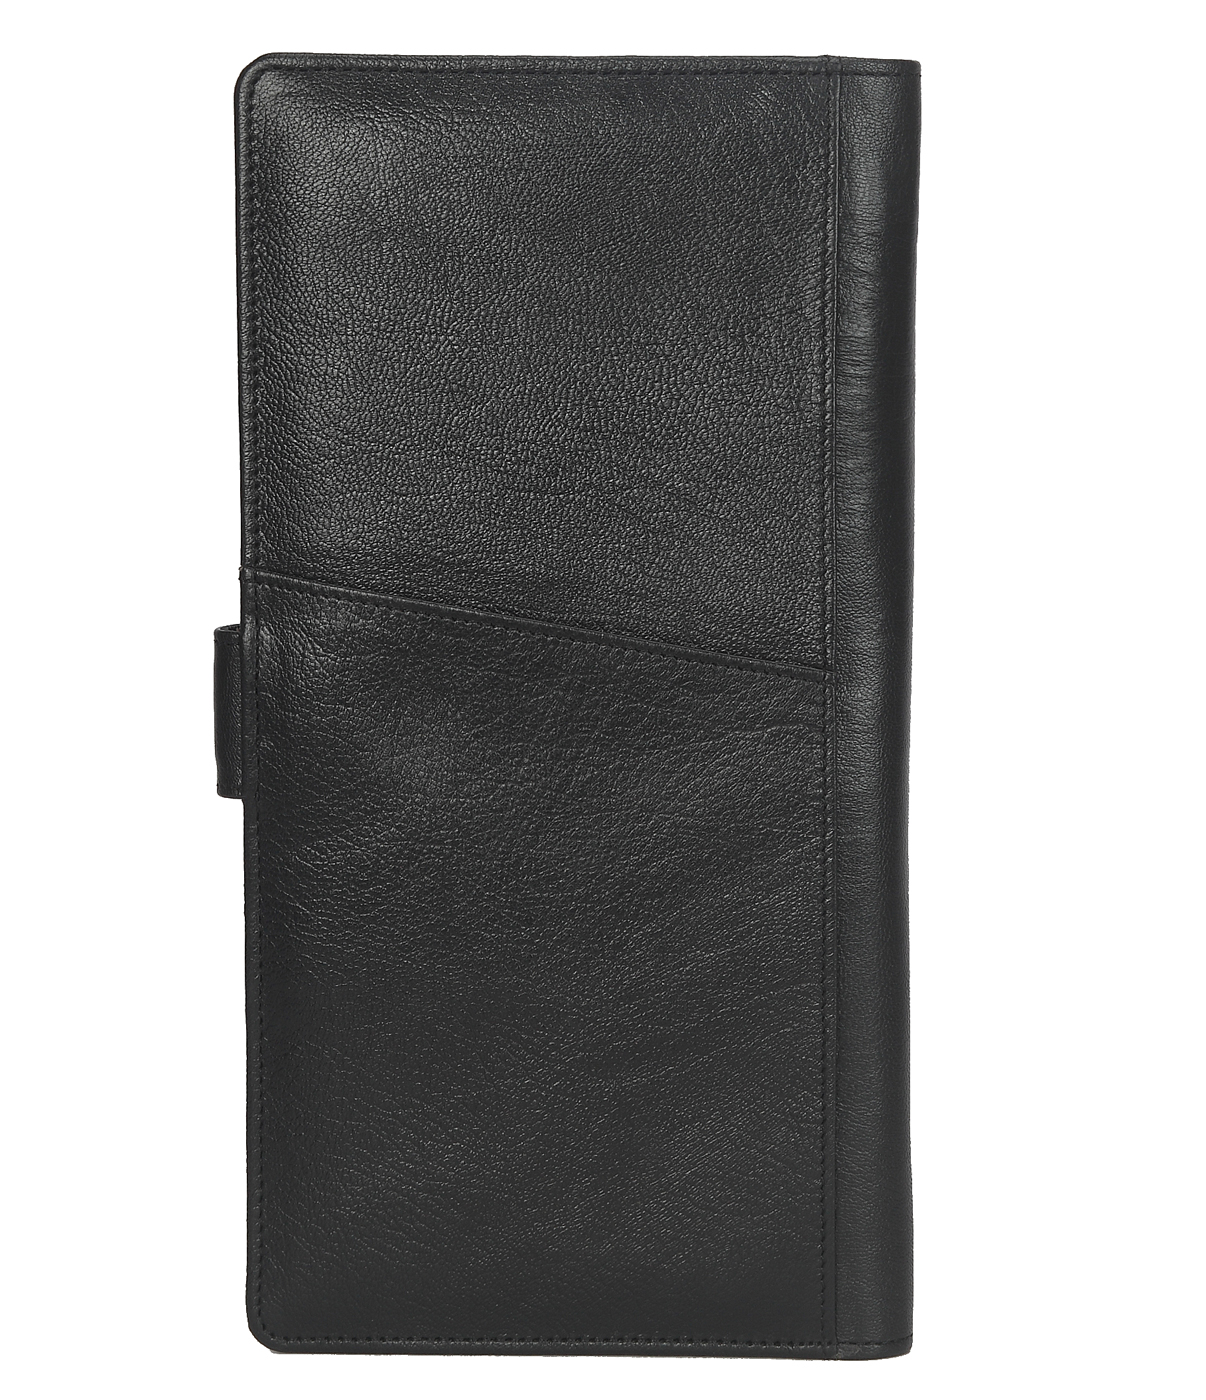 W247-Cynthia-Unisex wallet for travel documents in Genuine Leather - Black